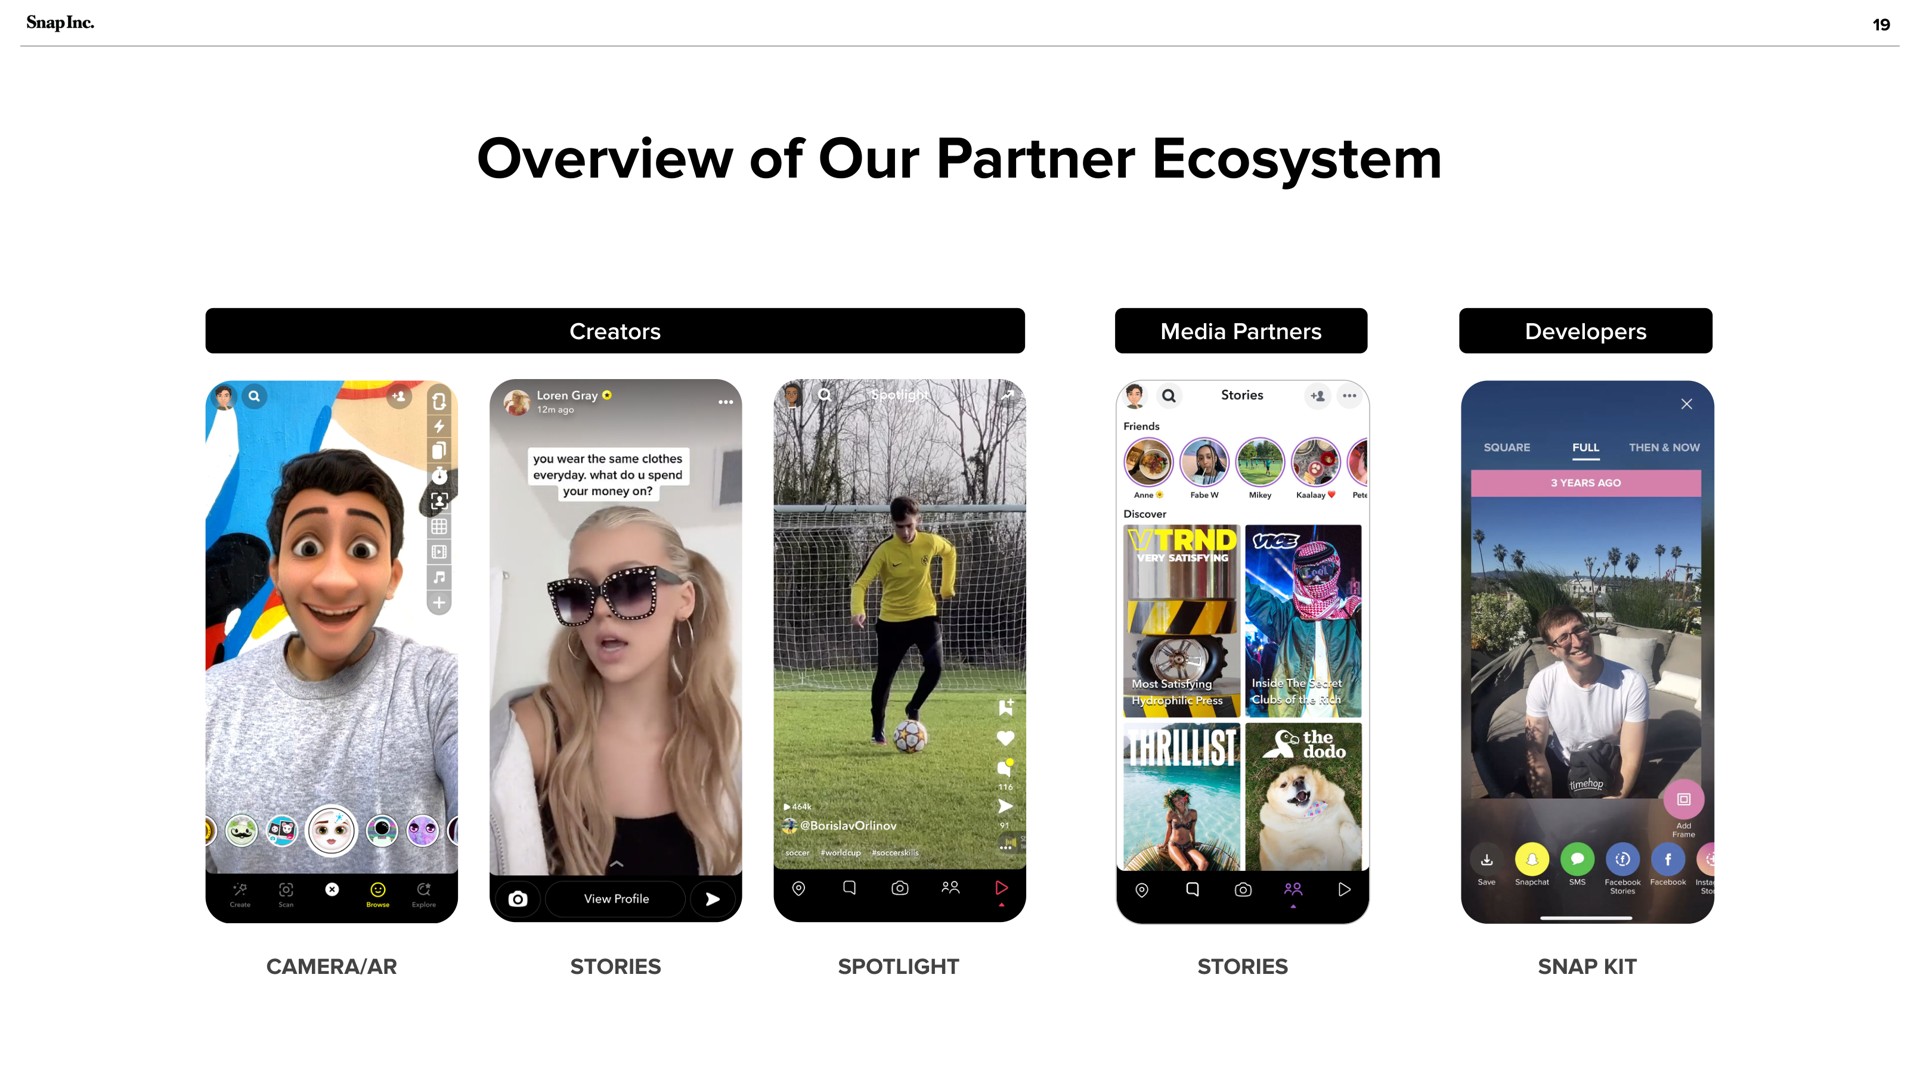 overview of our partner ecosystem | Snap Inc